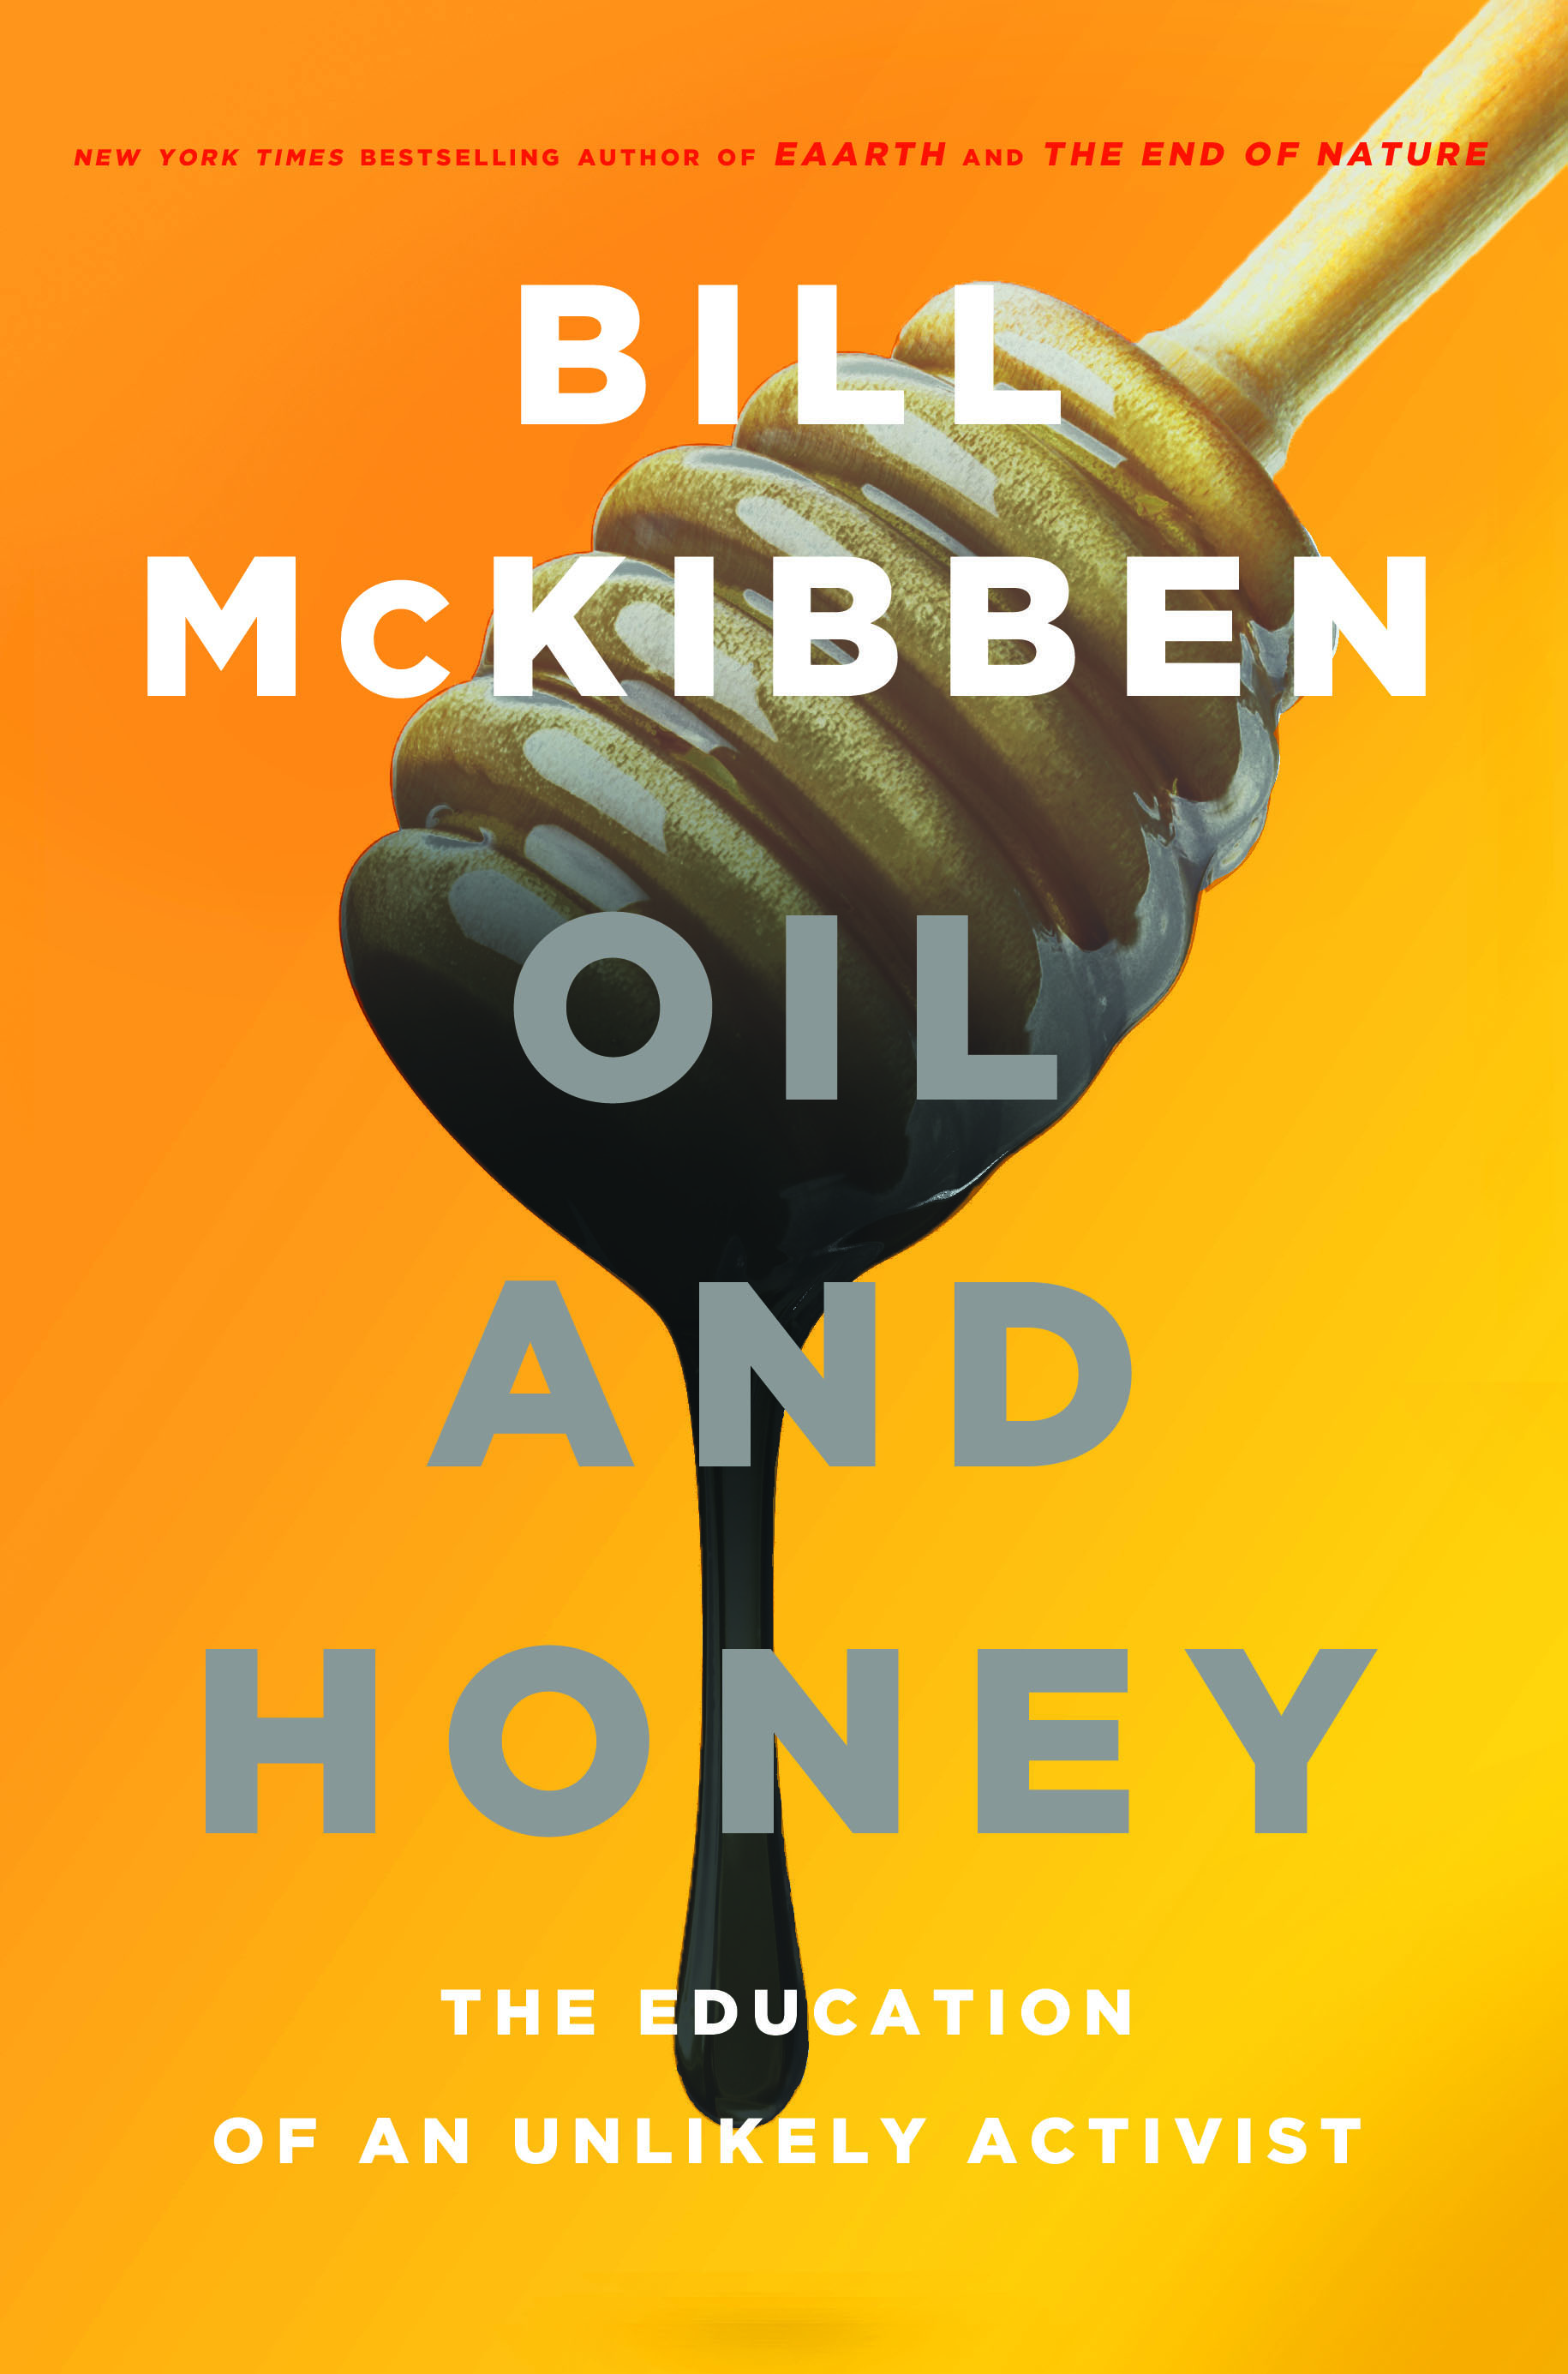  Brooklyn Book Festival Bookend Event & Book Launch: Oil and Honey by Bill McKibben